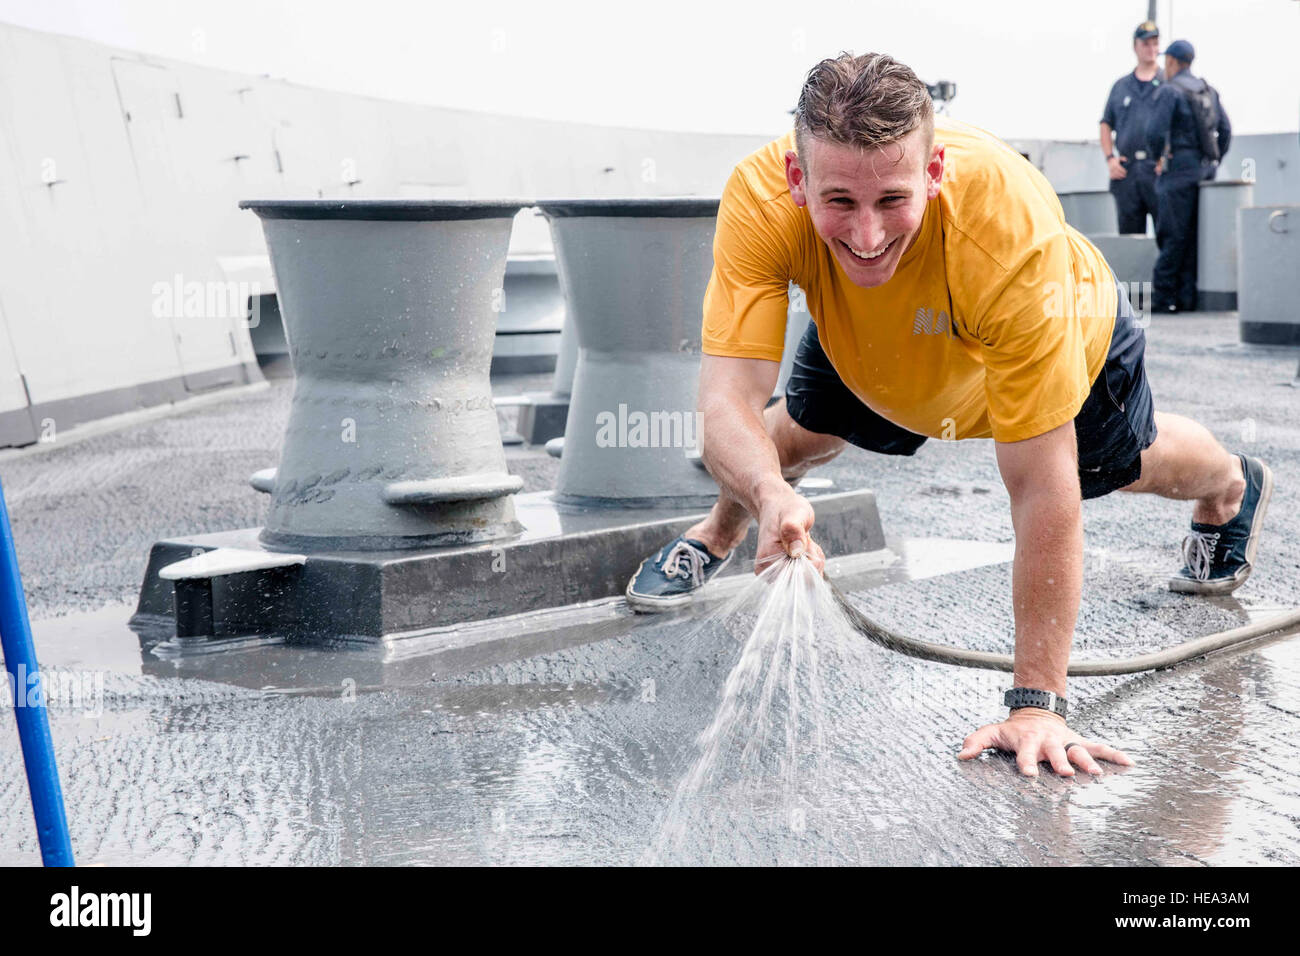 SASEBO, Japan (Aug. 4, 2016) Lt. Brennan Hosack sprays water on the forecastle of the amphibious transport dock ship USS Green Bay (LPD 20) during a freshwater wash-down. Green Bay is attached to the Bonhomme Richard Amphibious Ready Group and is currently underway conducting preparations for an upcoming deployment to the U.S. 7th Fleet area of operations.  Mass Communication Specialist 1st Class Chris Williamson Stock Photo